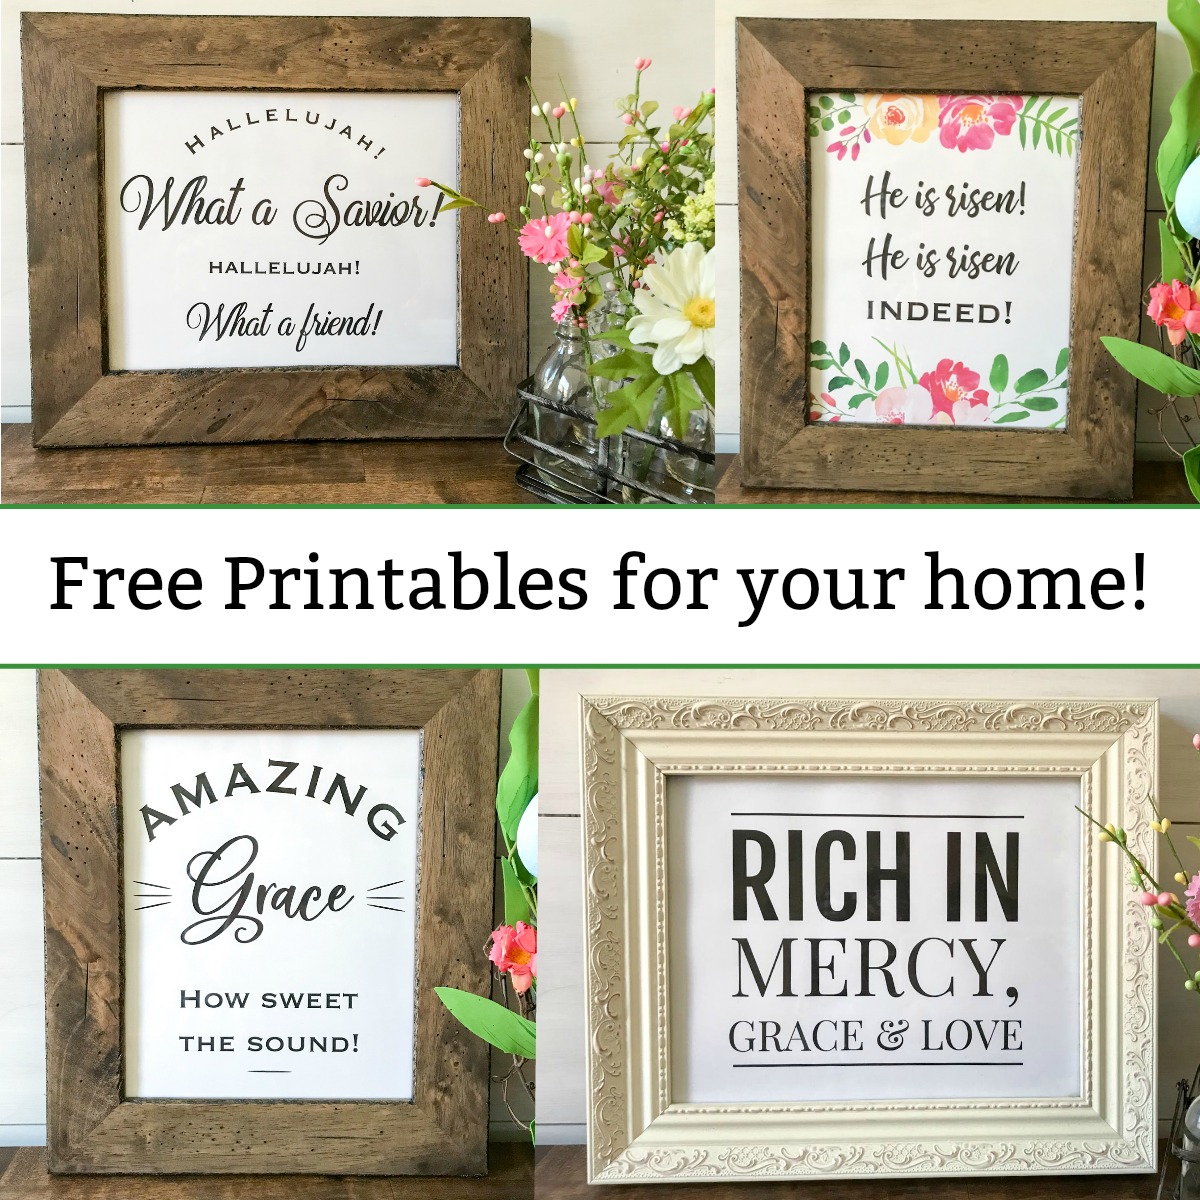 Free printable for your home! Hallelujah, He is Risen, Amazing Grace, and Rich in Mercy!